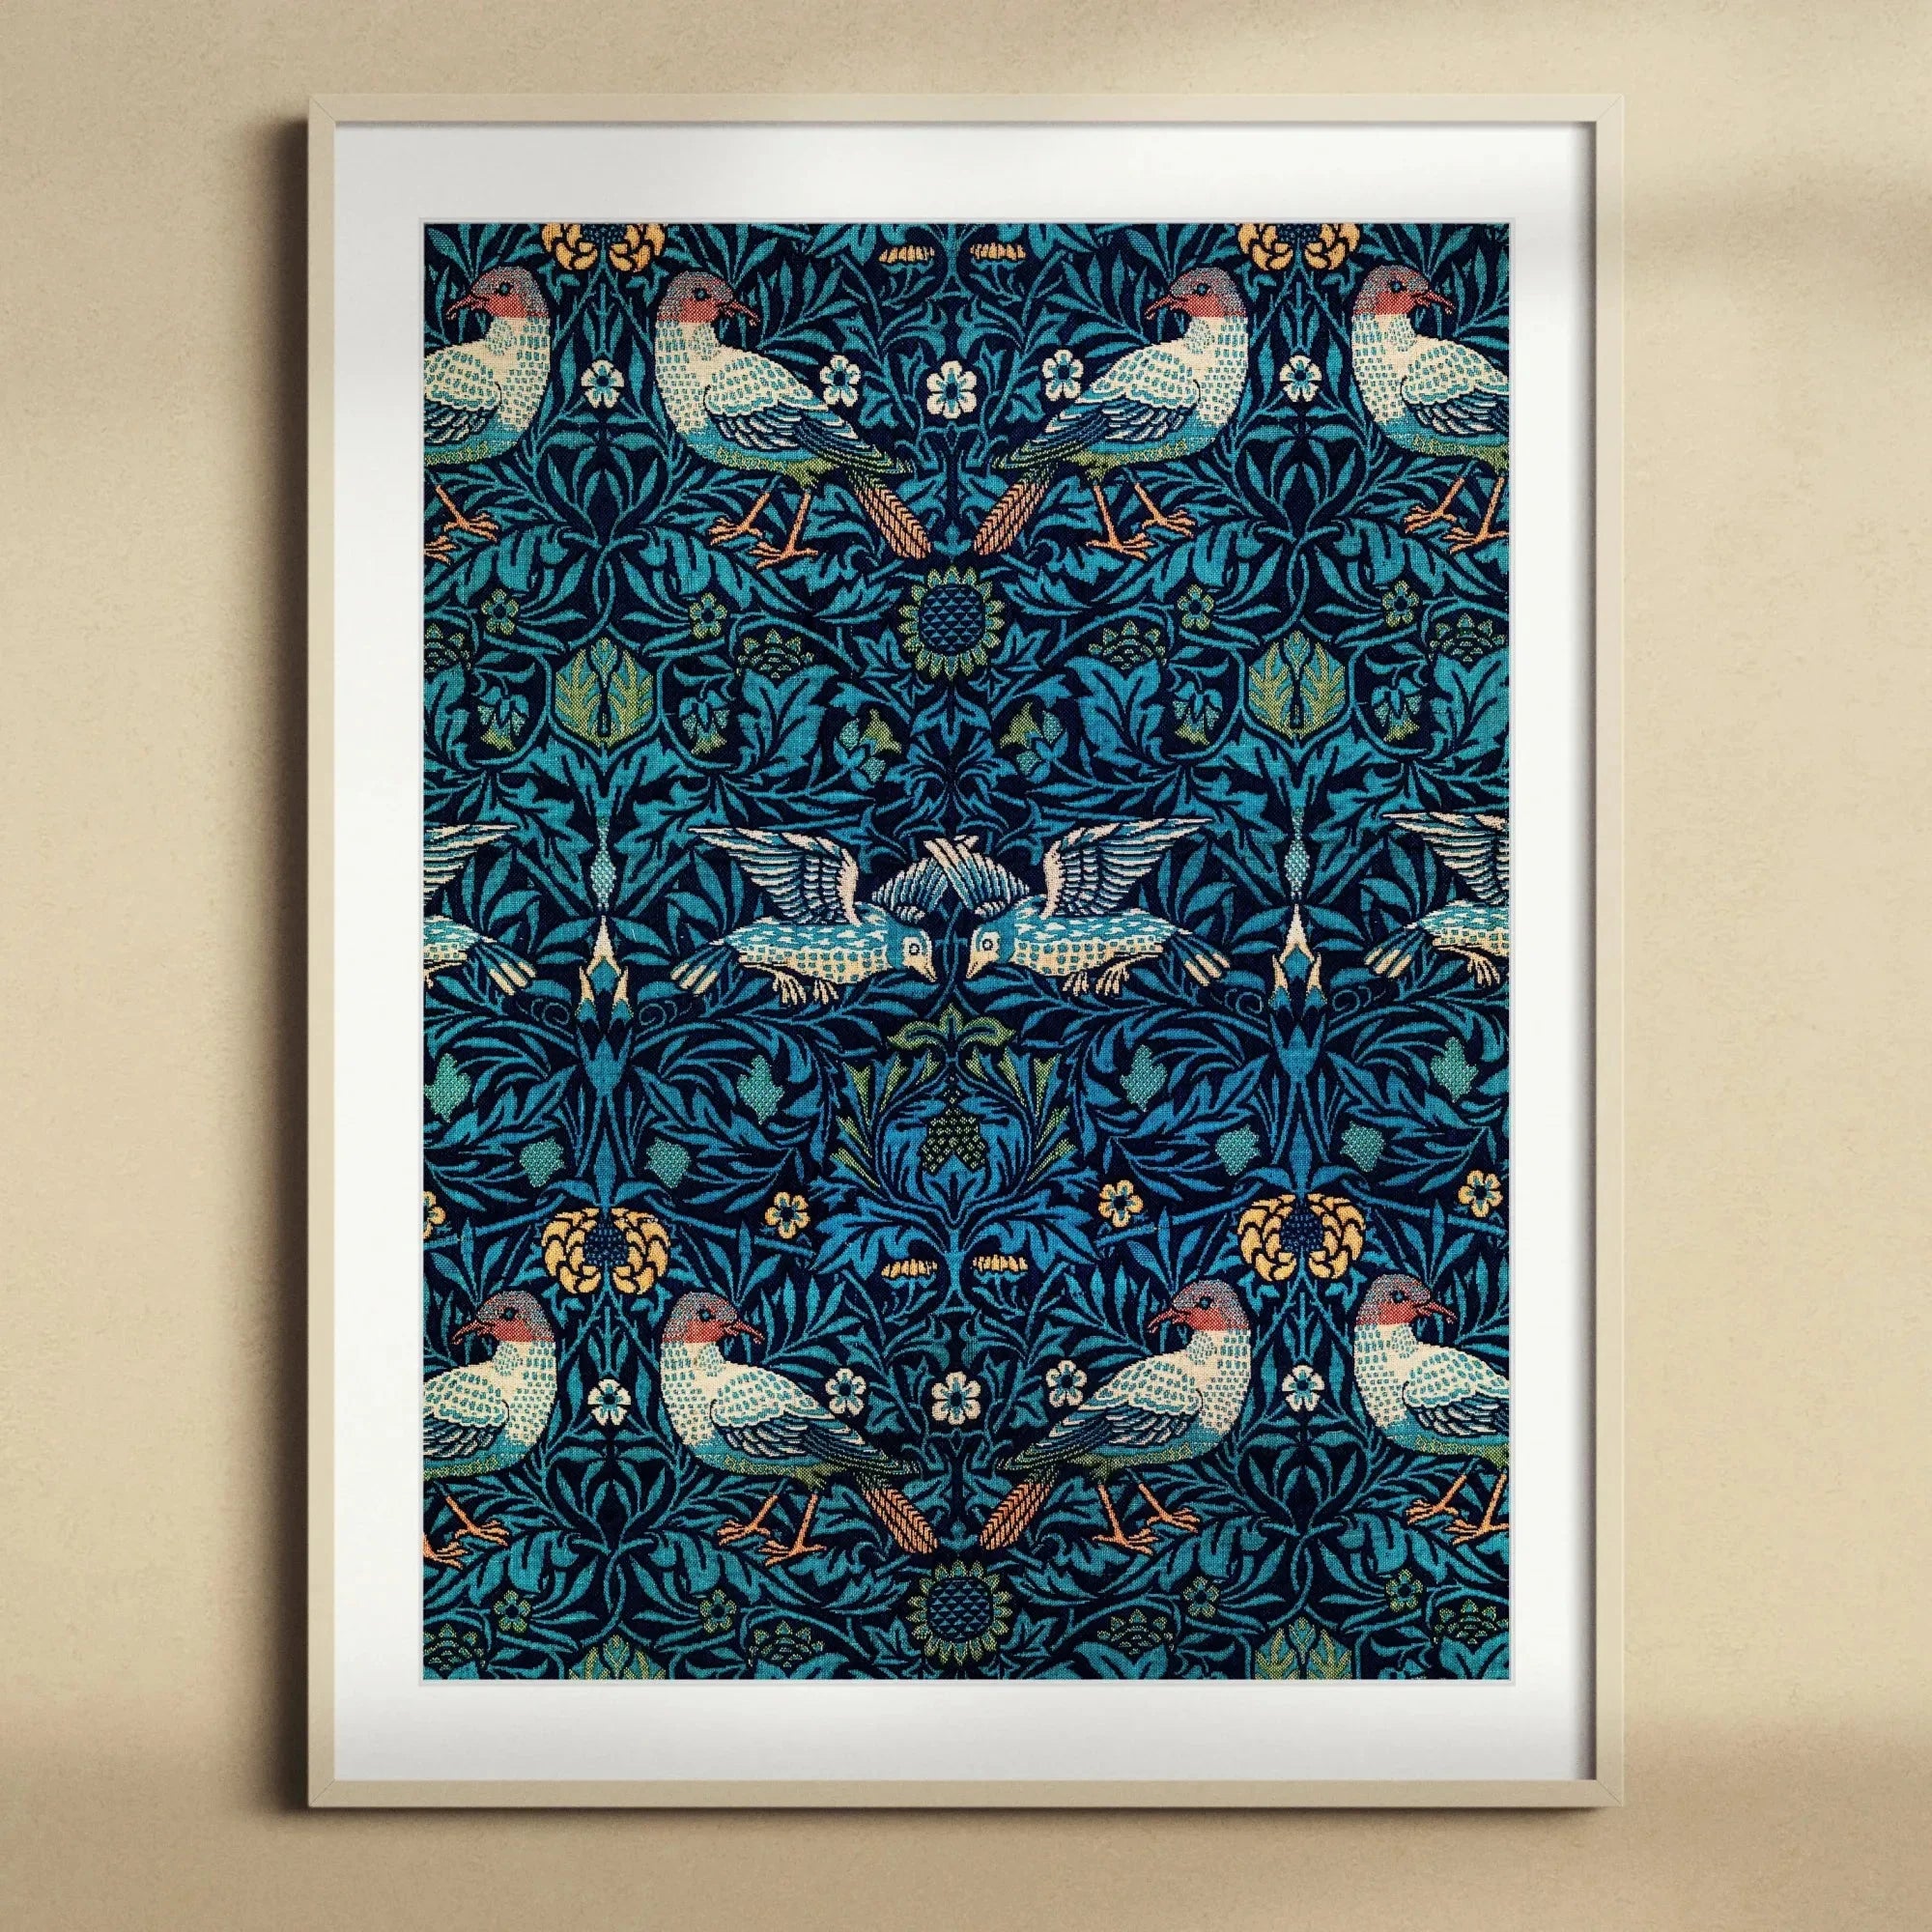 Birds By William Morris Framed & Mounted Print - Posters Prints & Visual Artwork - Aesthetic Art